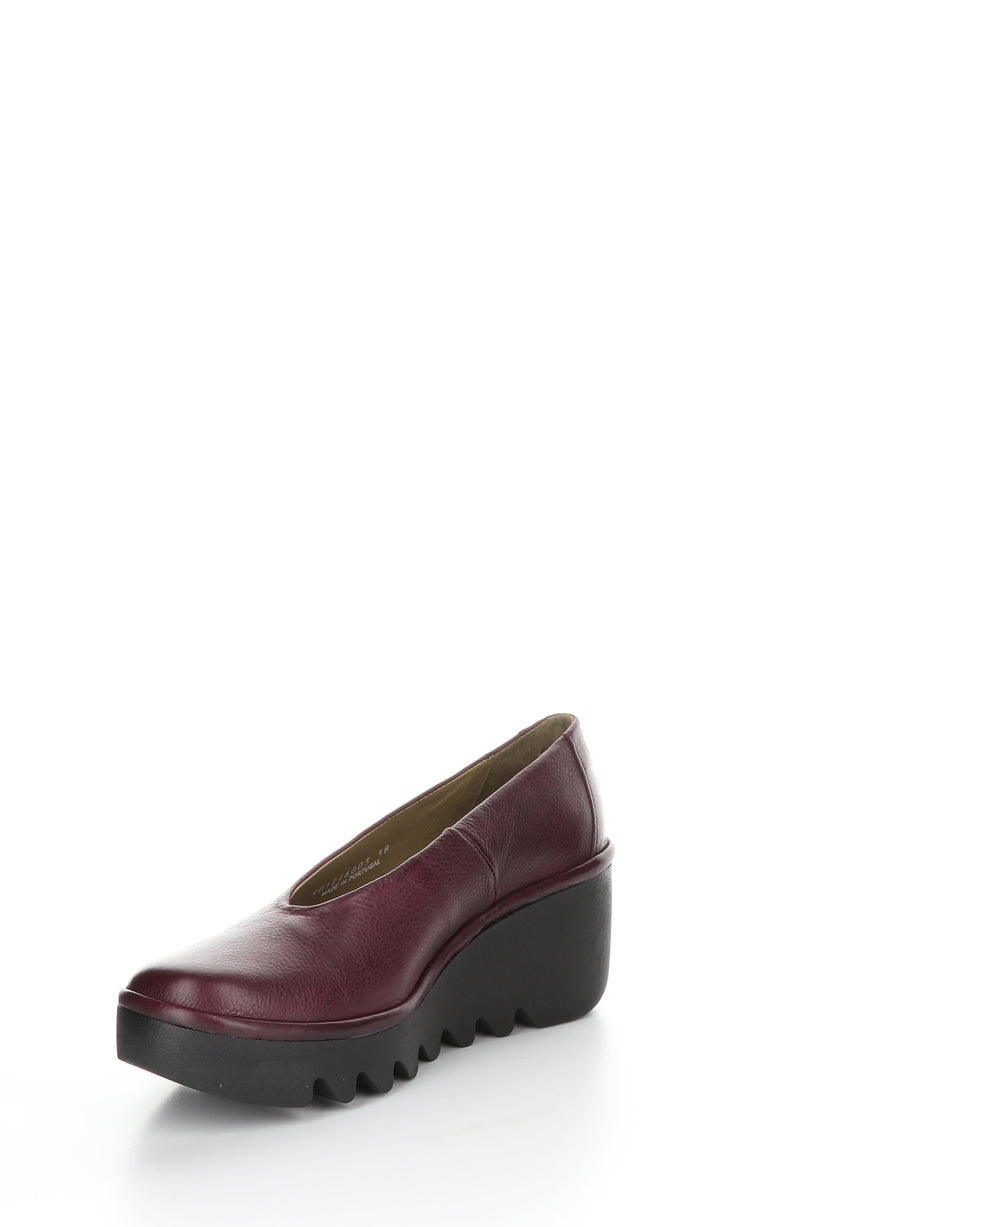 BESO246FLY Wine Round Toe Shoes